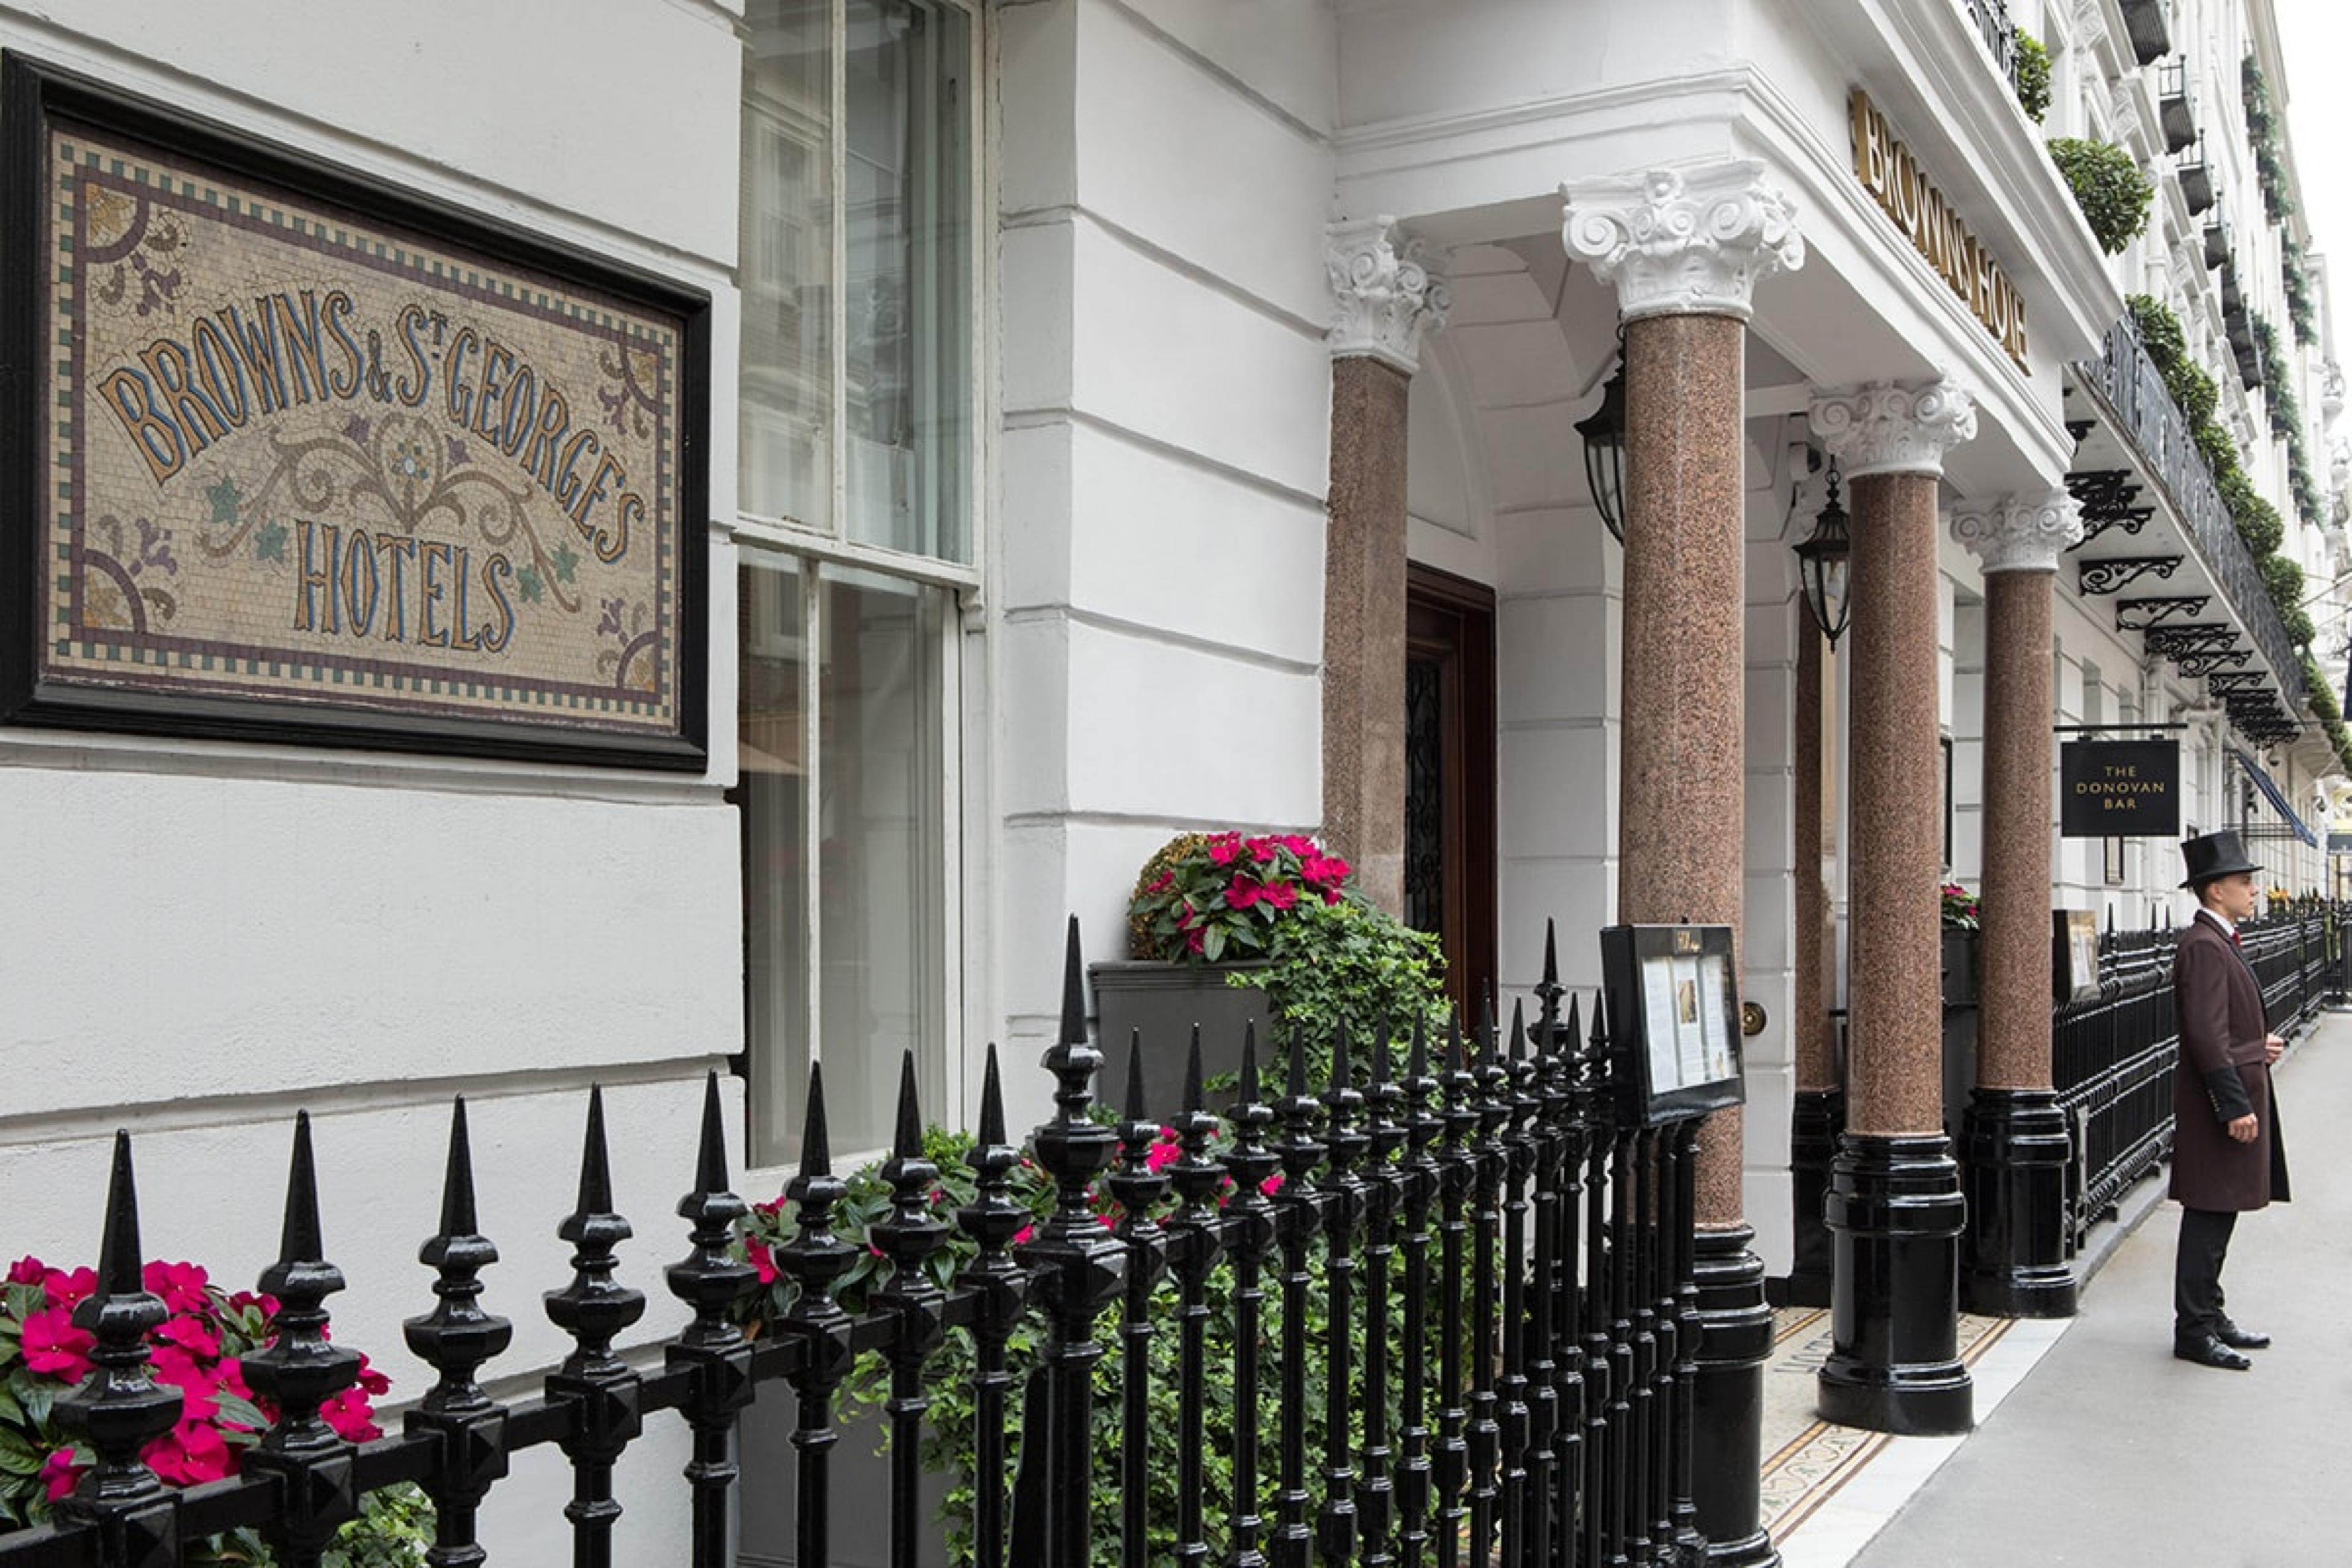 London hotel entrance on typical London street with white-stone townhomes in a row and hotel doorman